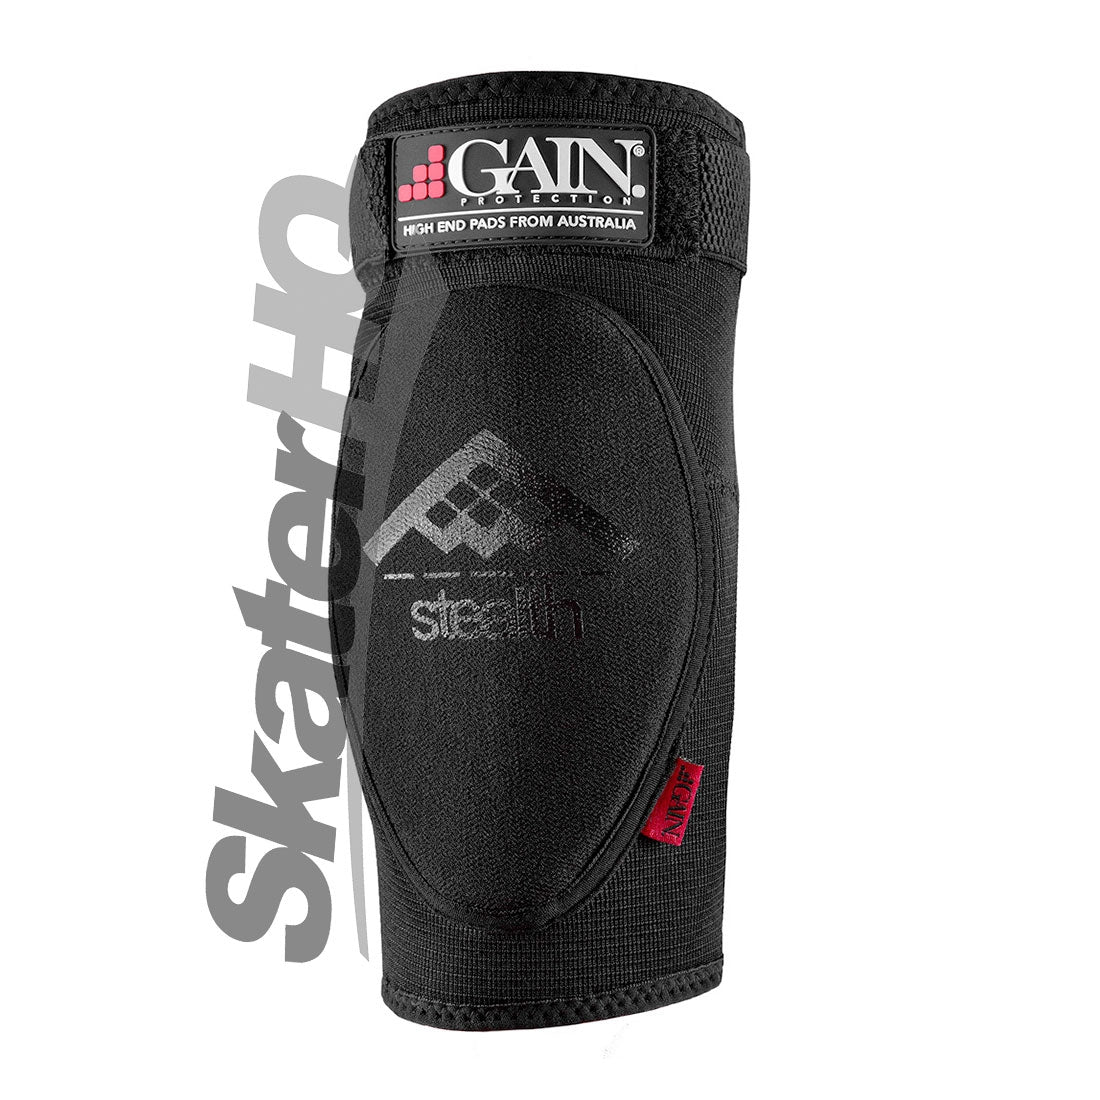 GAIN Stealth Elbow Pads - Black - S Protective Gear